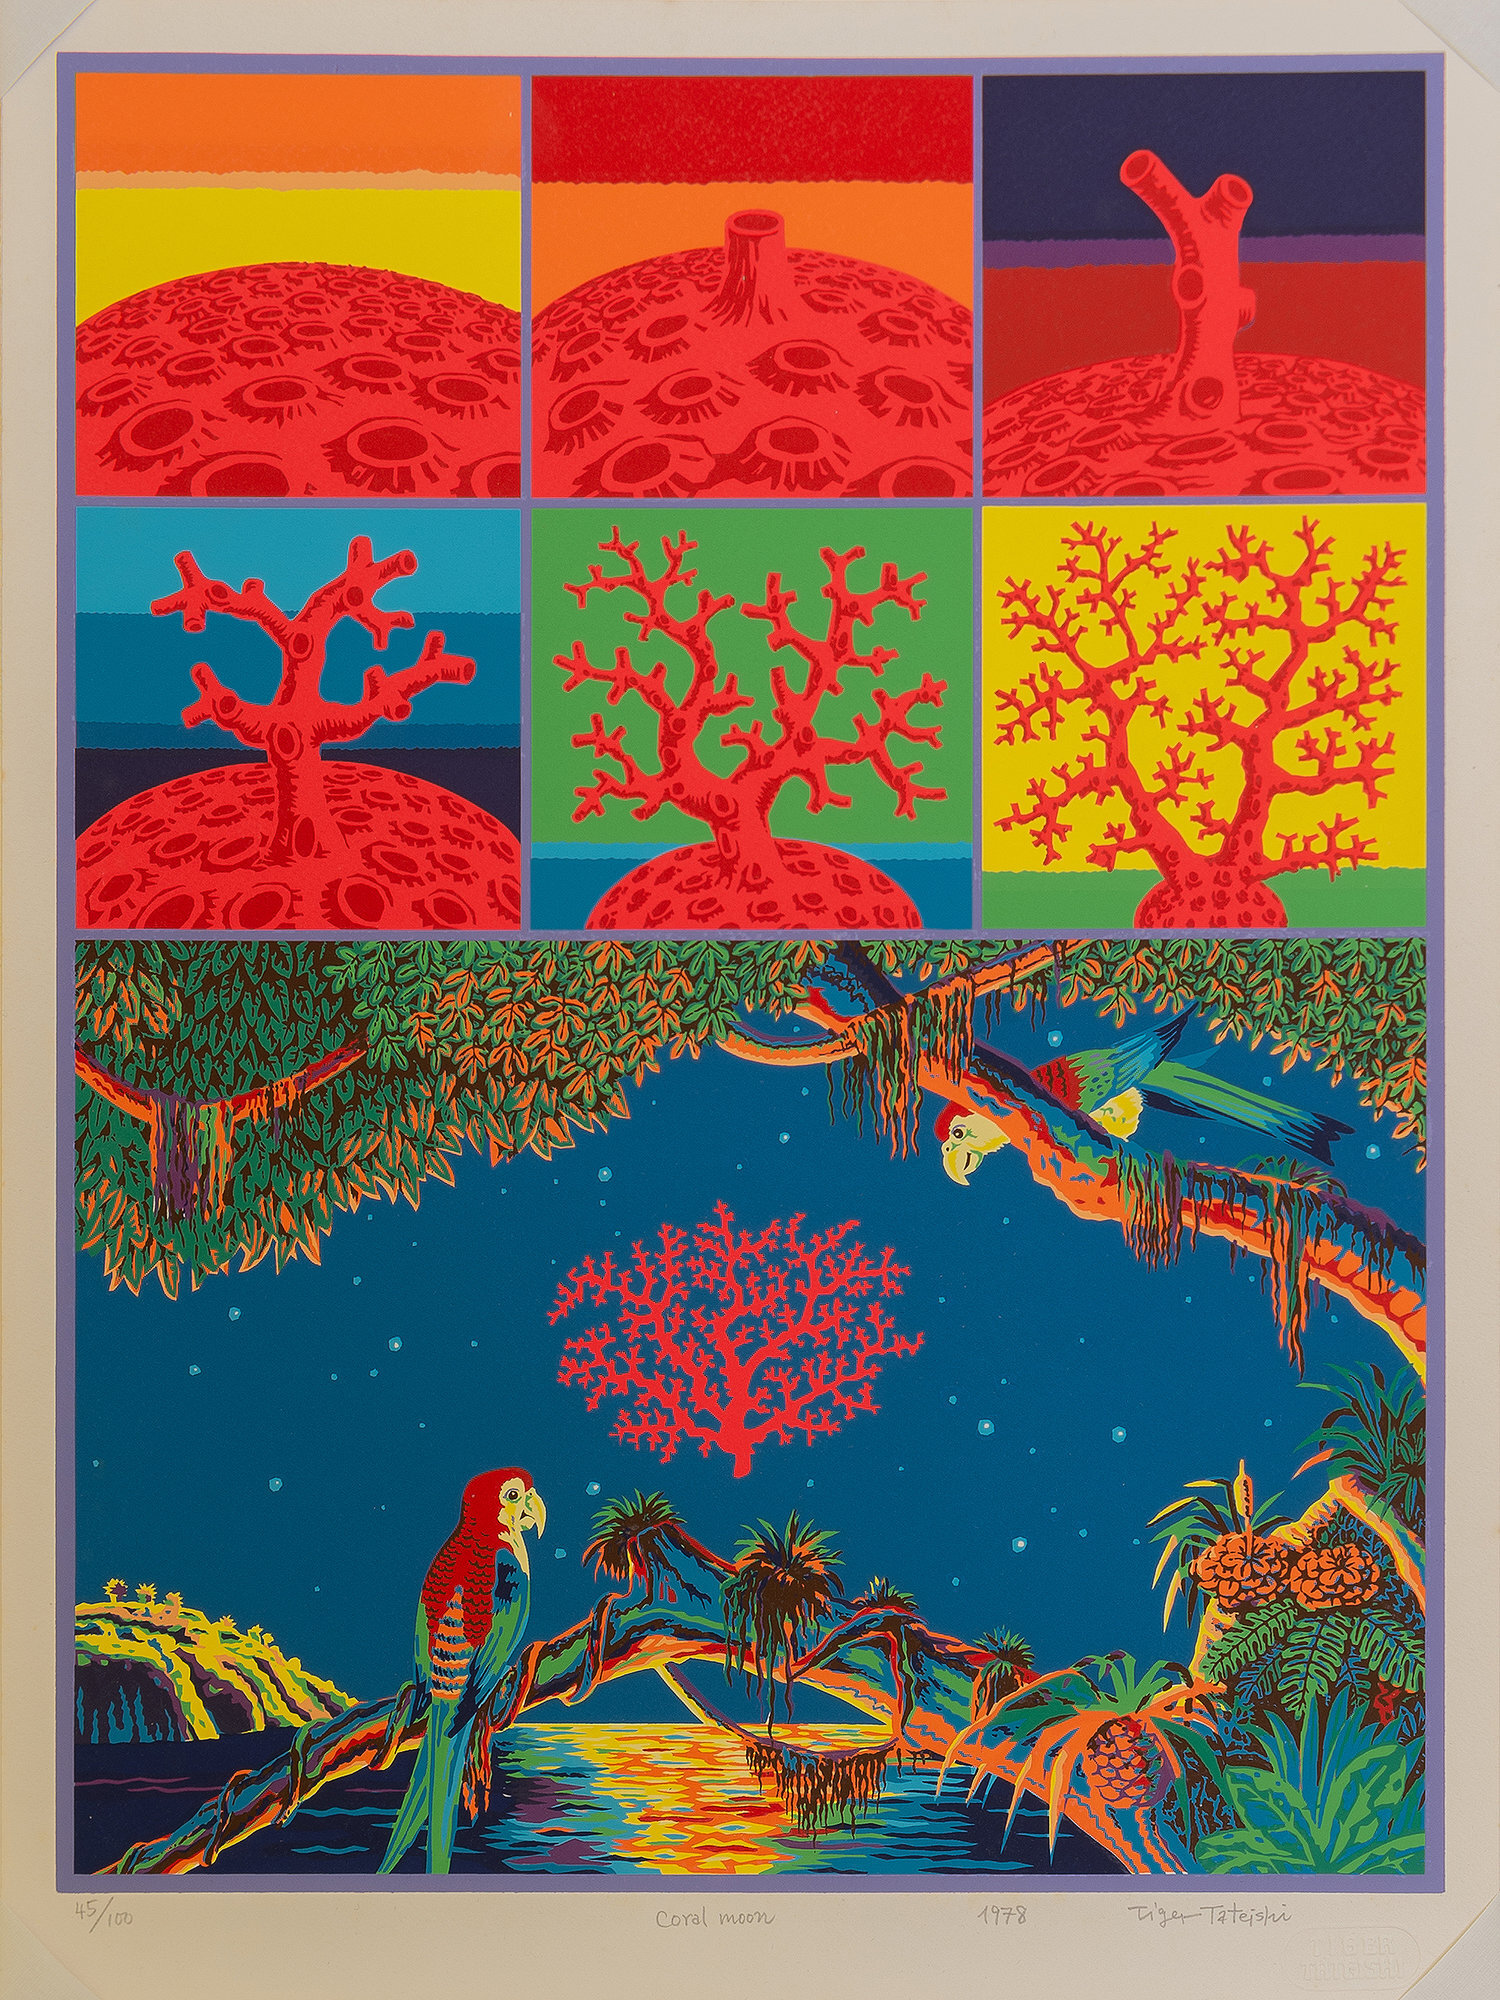  Tiger Tateishi,  Coral Moon , 1978. Silk screen on paper, 18-1/8 x 13-7/16 inches (unframed dimensions).         